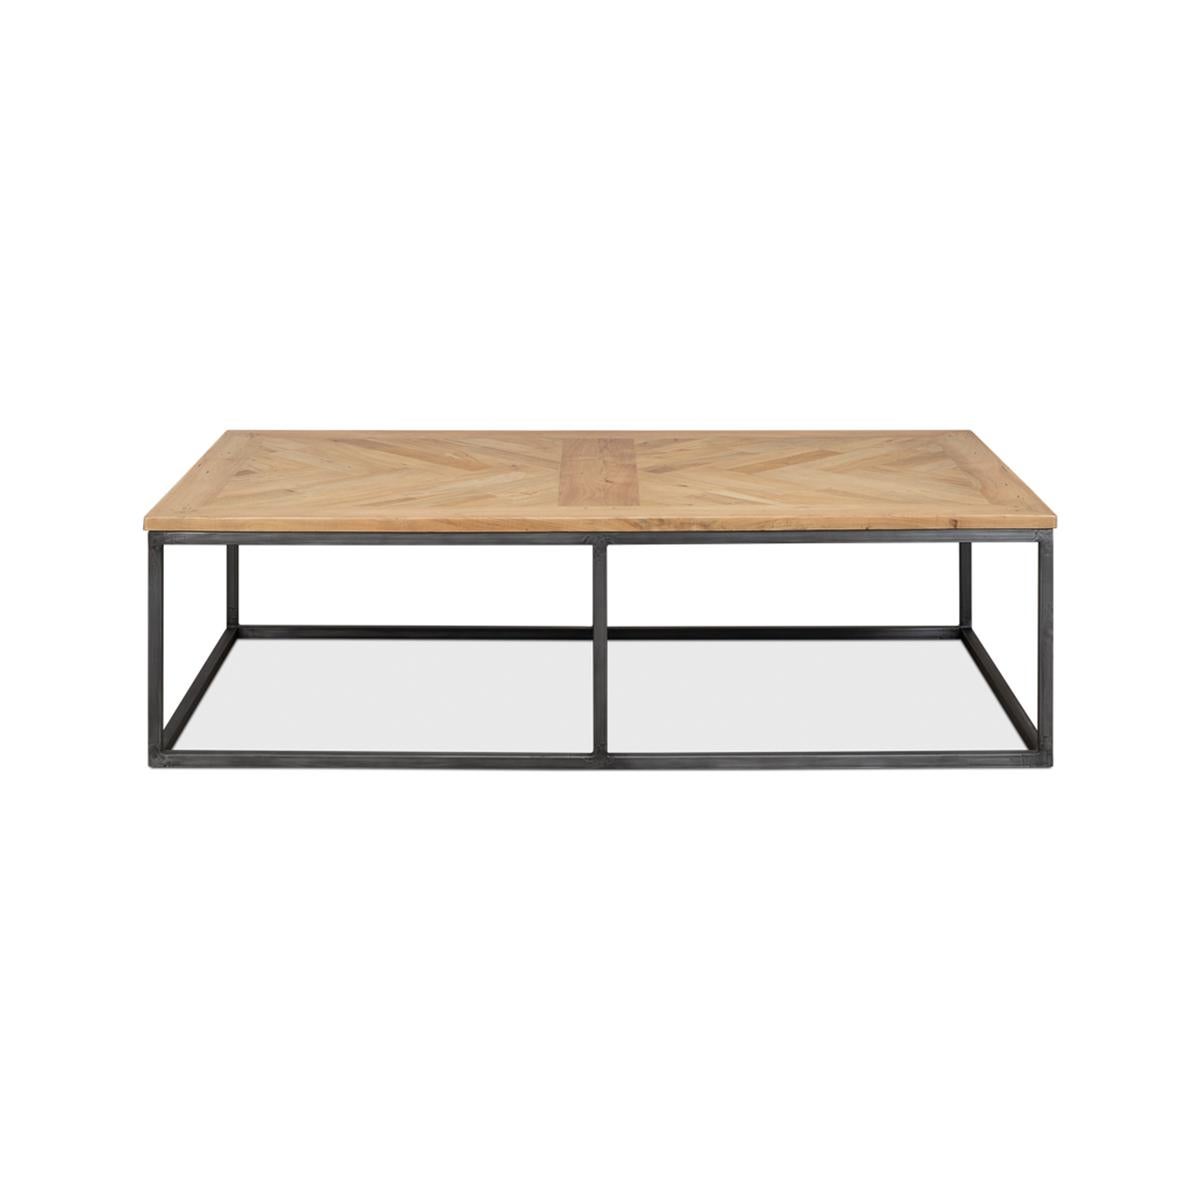 A large coffee table made with recycled wood in a parquet pattern combined with an cube form iron base gives this rectangular table a good look.

Dimensions: 65